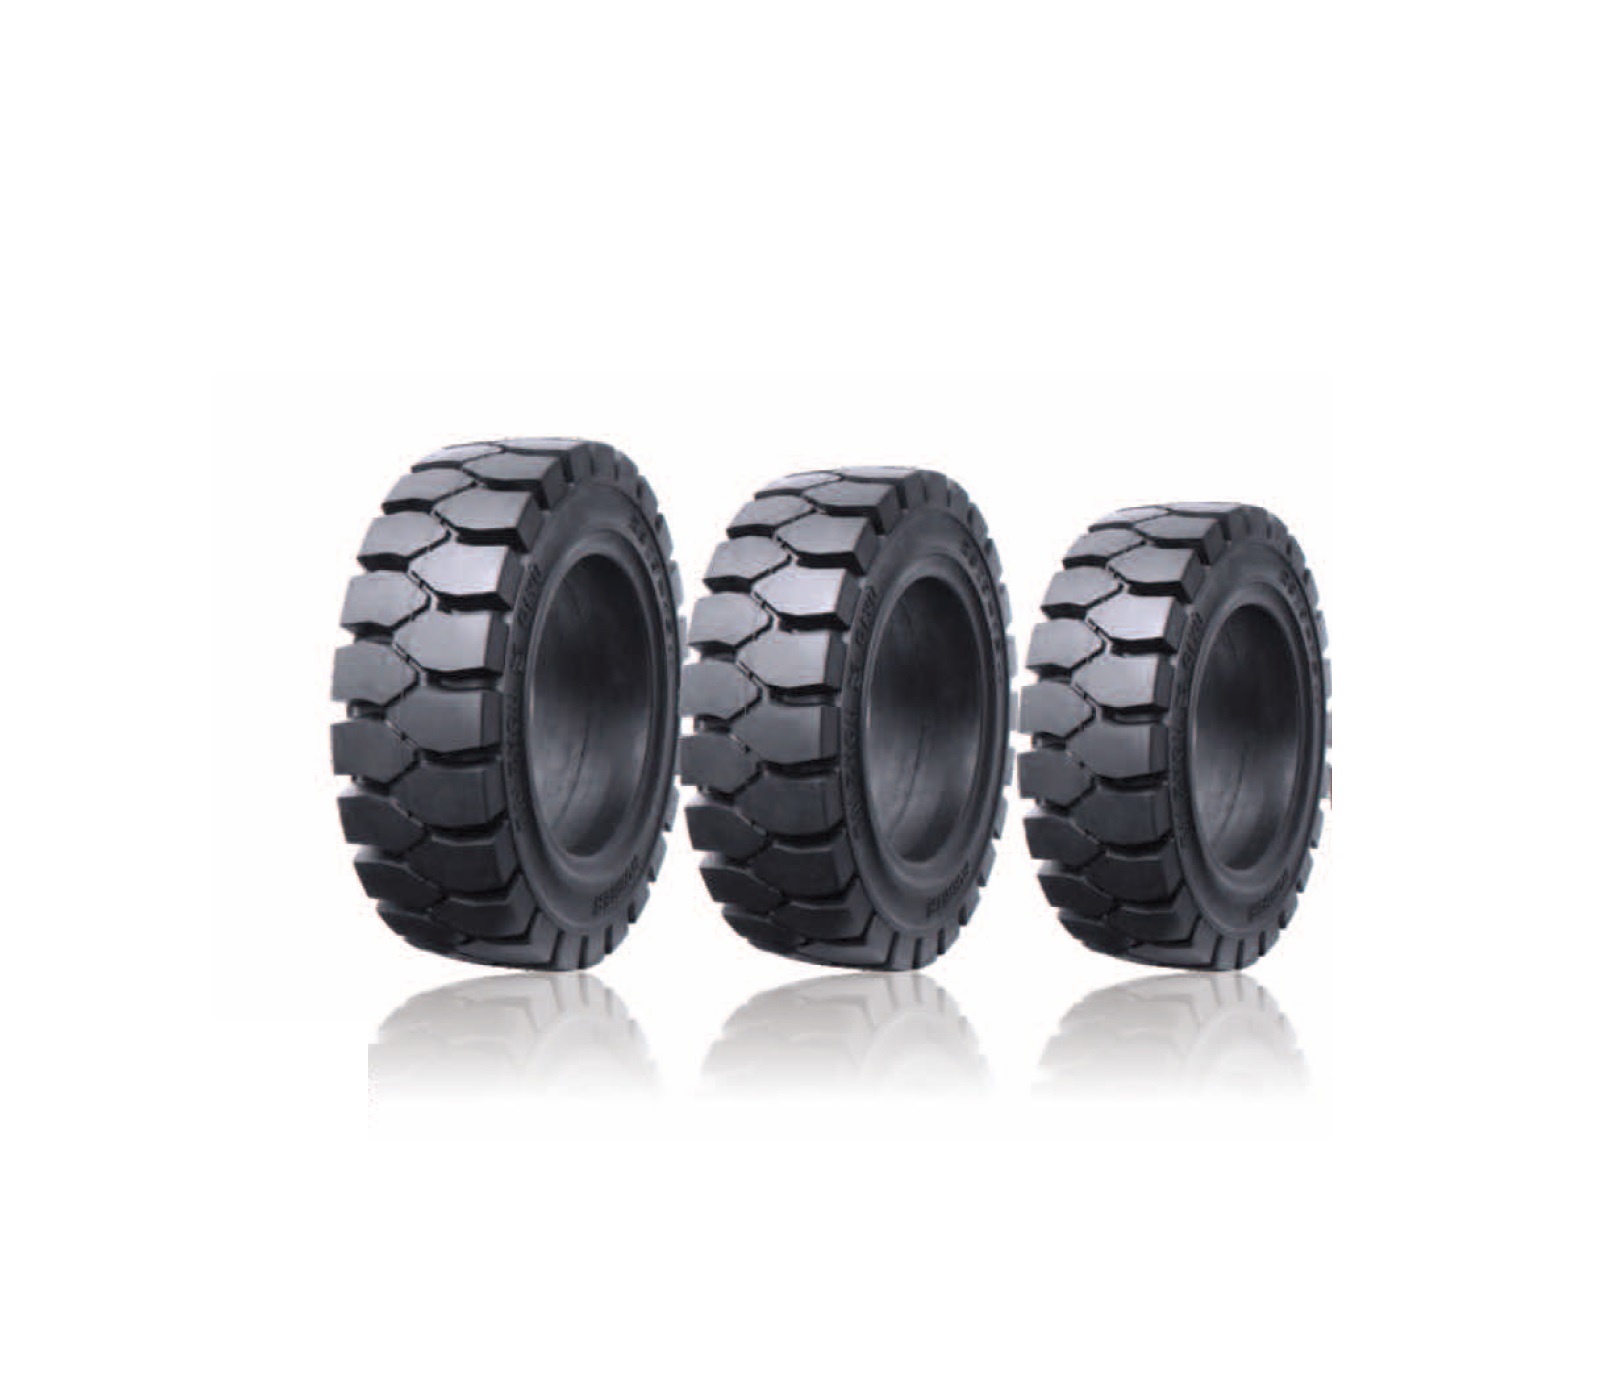 SolidTyre1-3